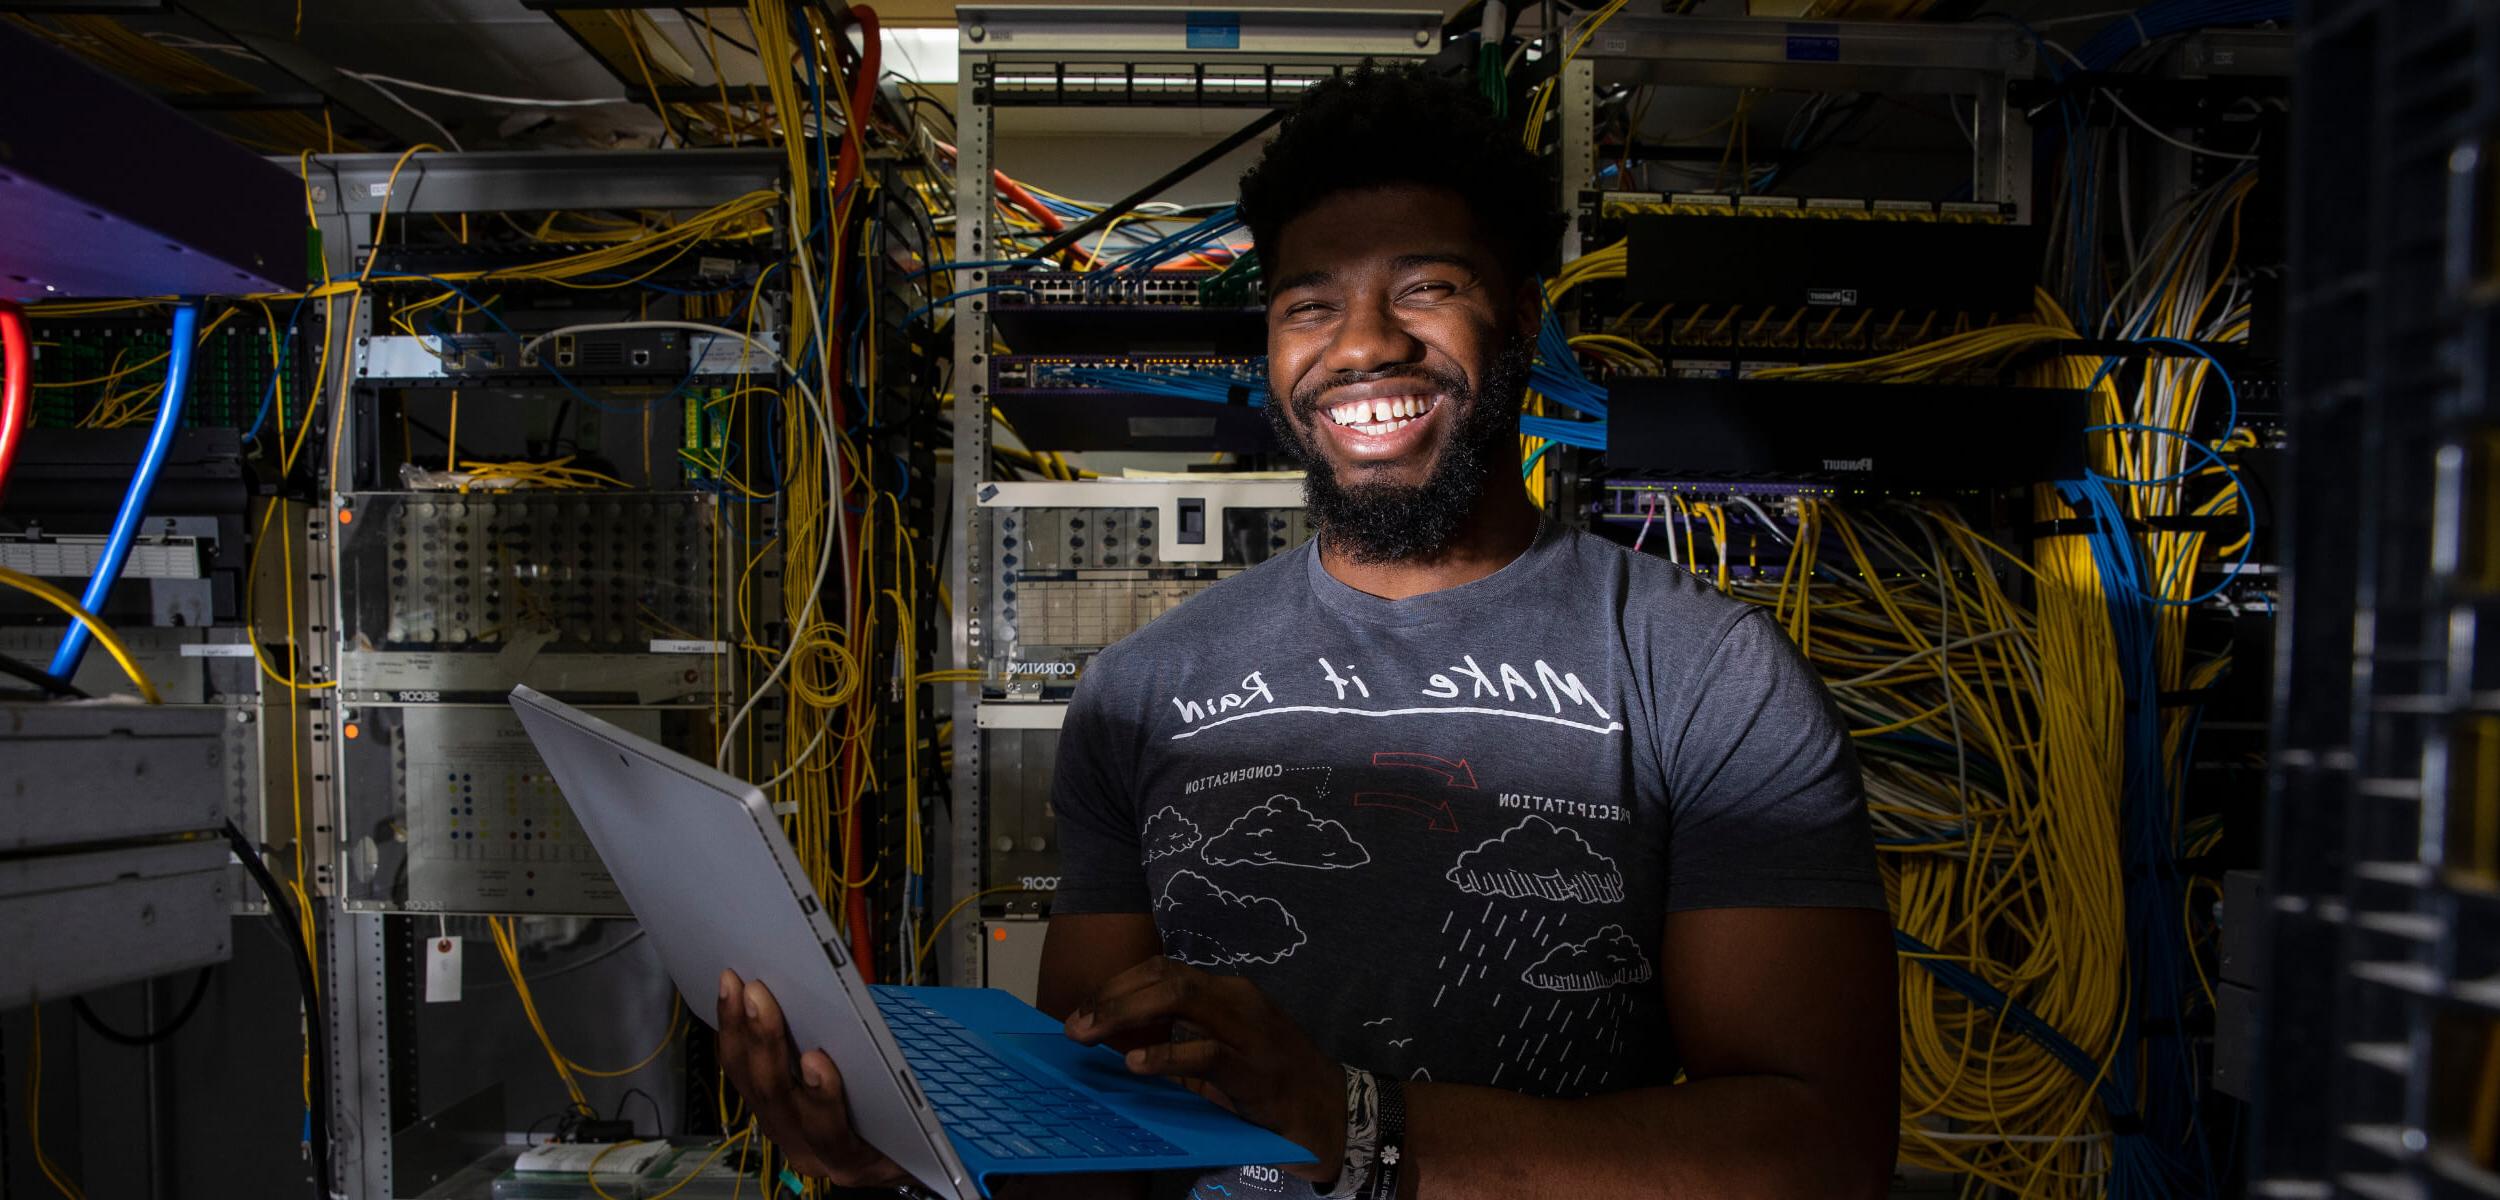 Student standing in server room smiling.